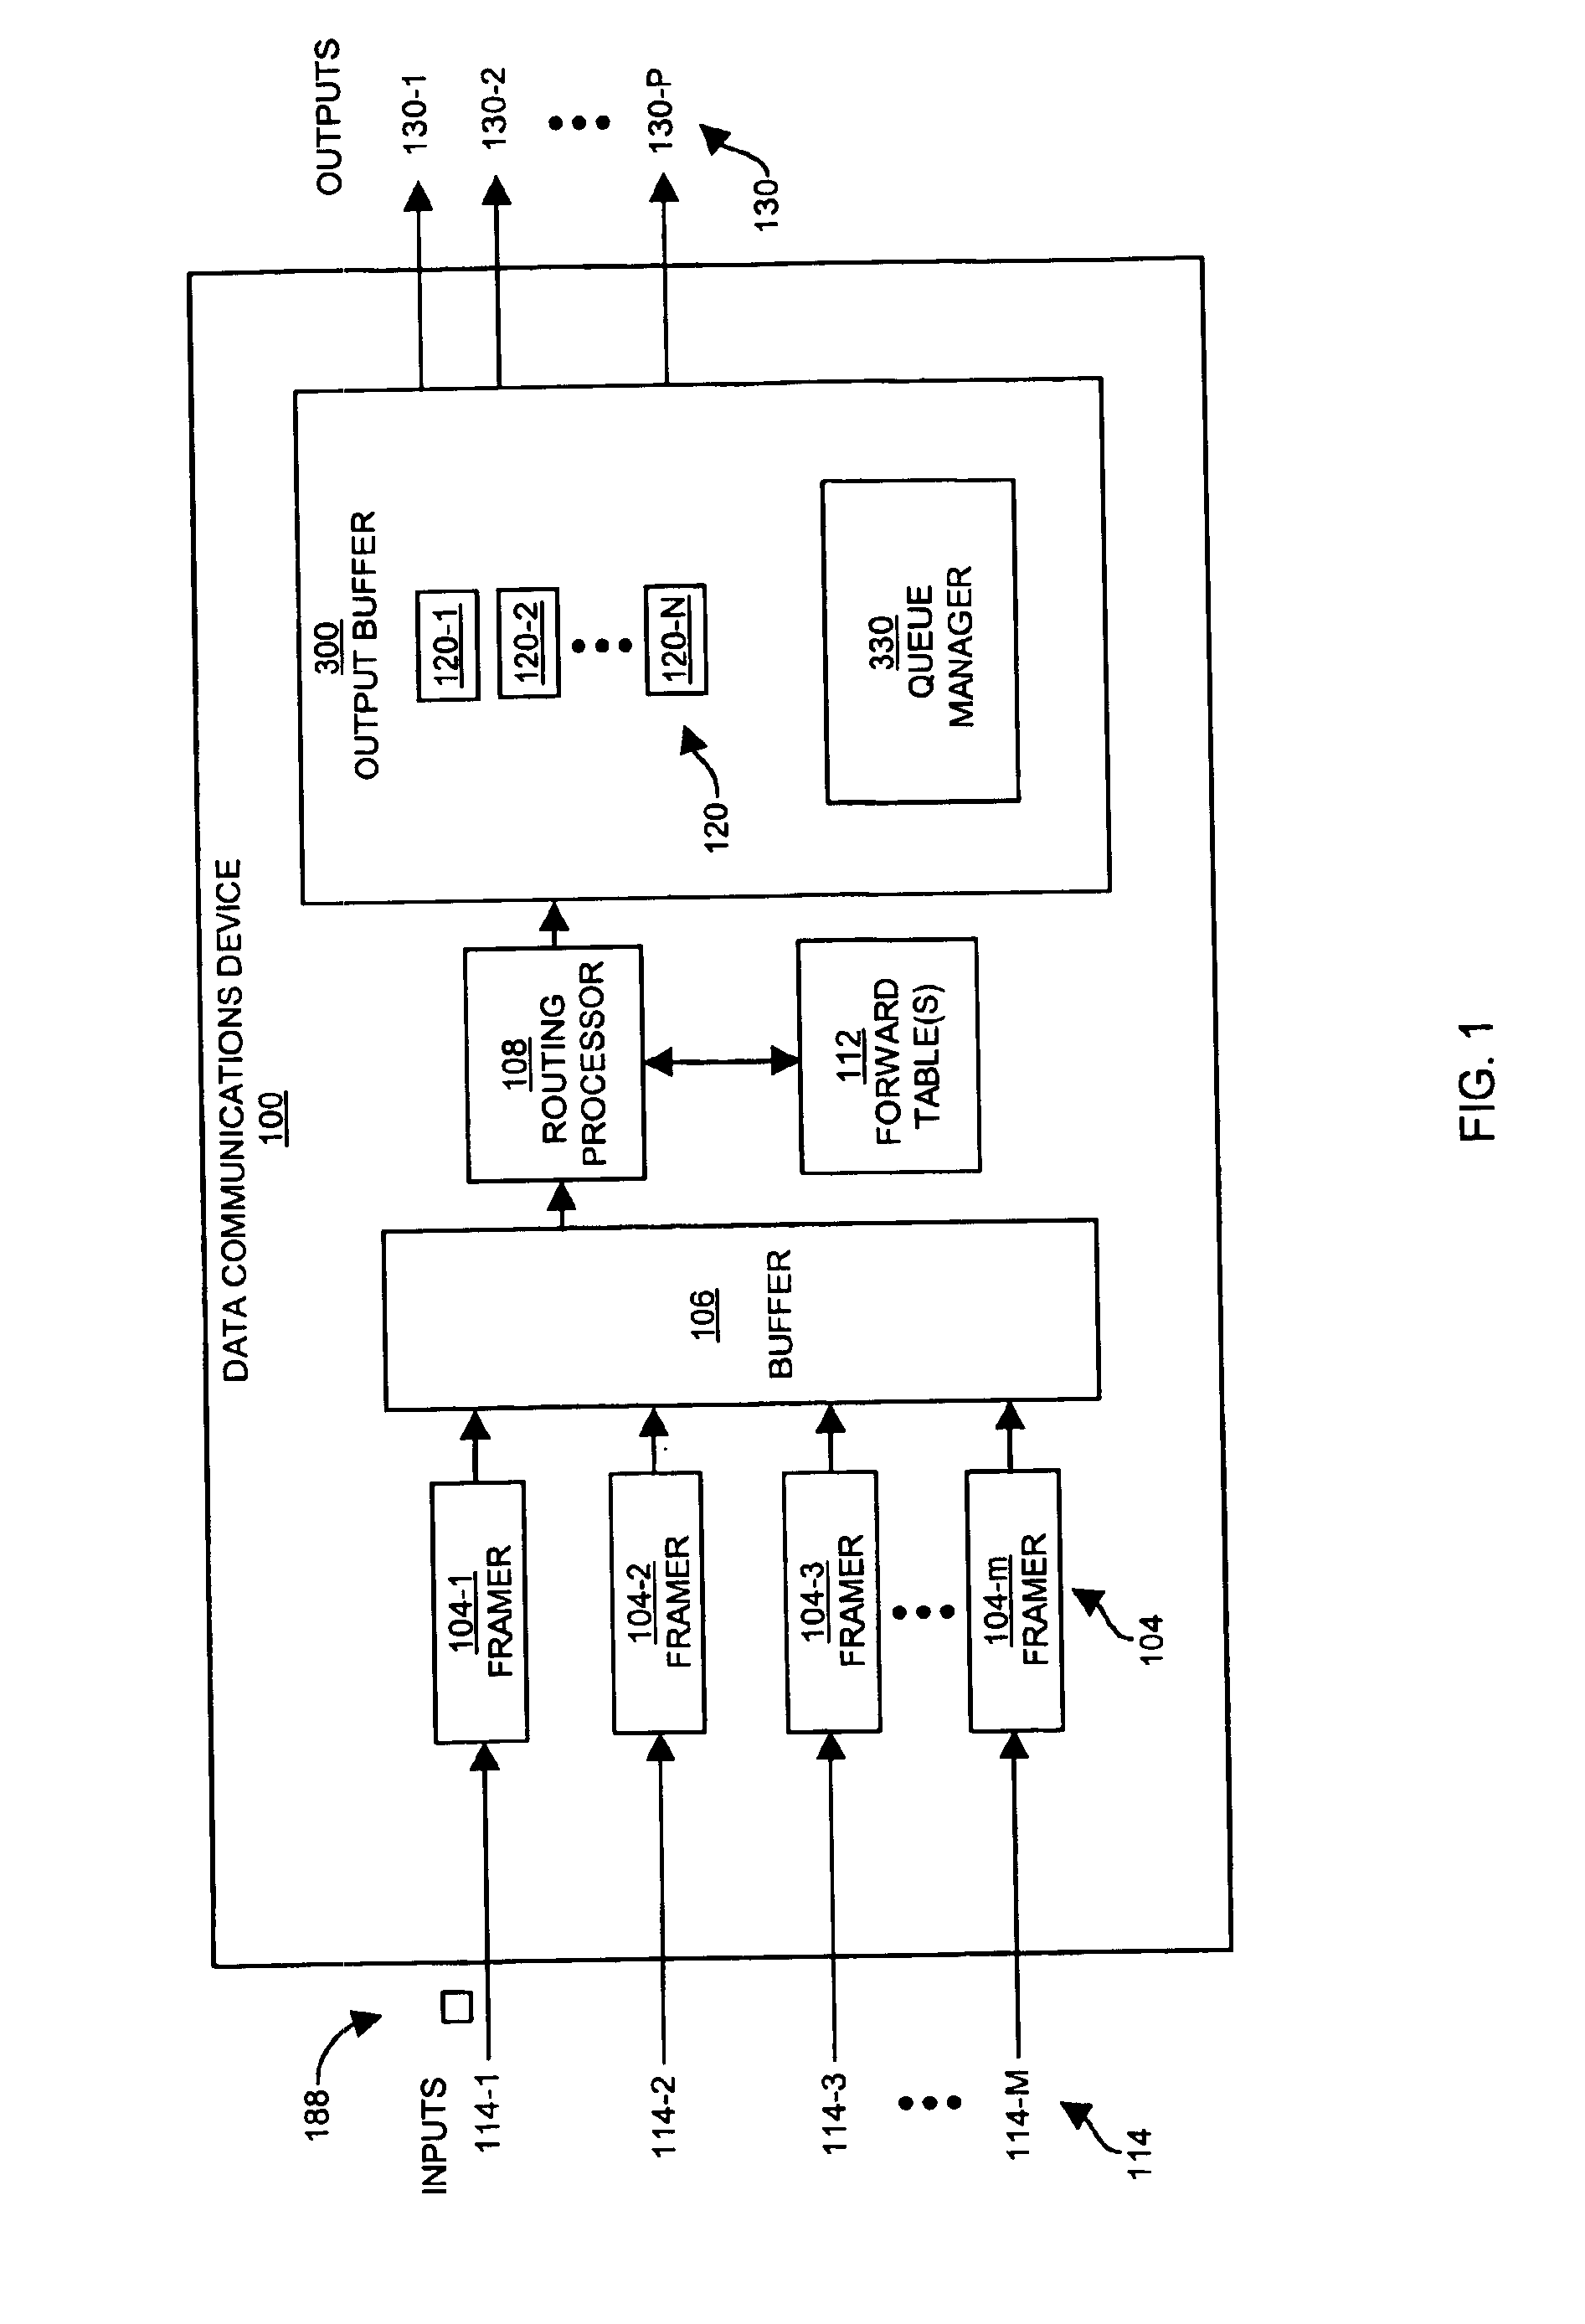 Methods and apparatus for maintaining queues